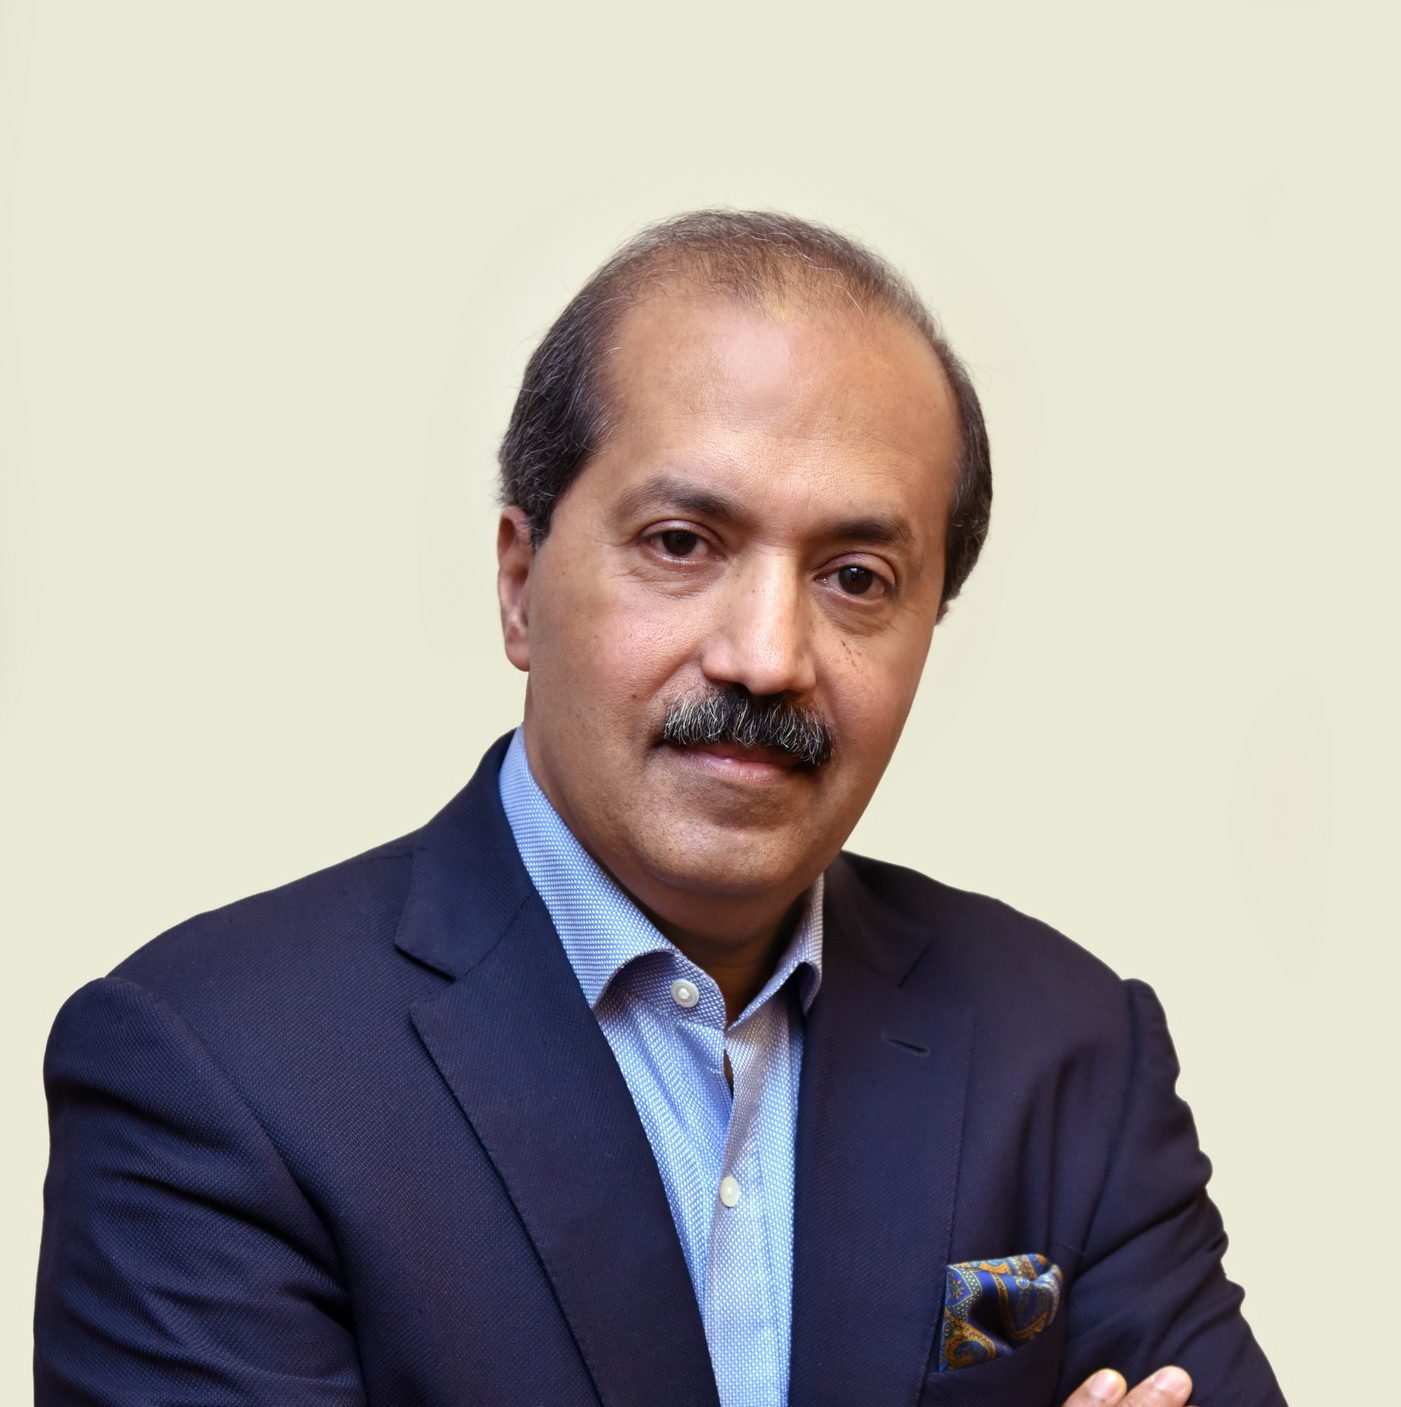 The entrepreneurial ecosystem in India has just started, says PE veteran Sanjay Nayar